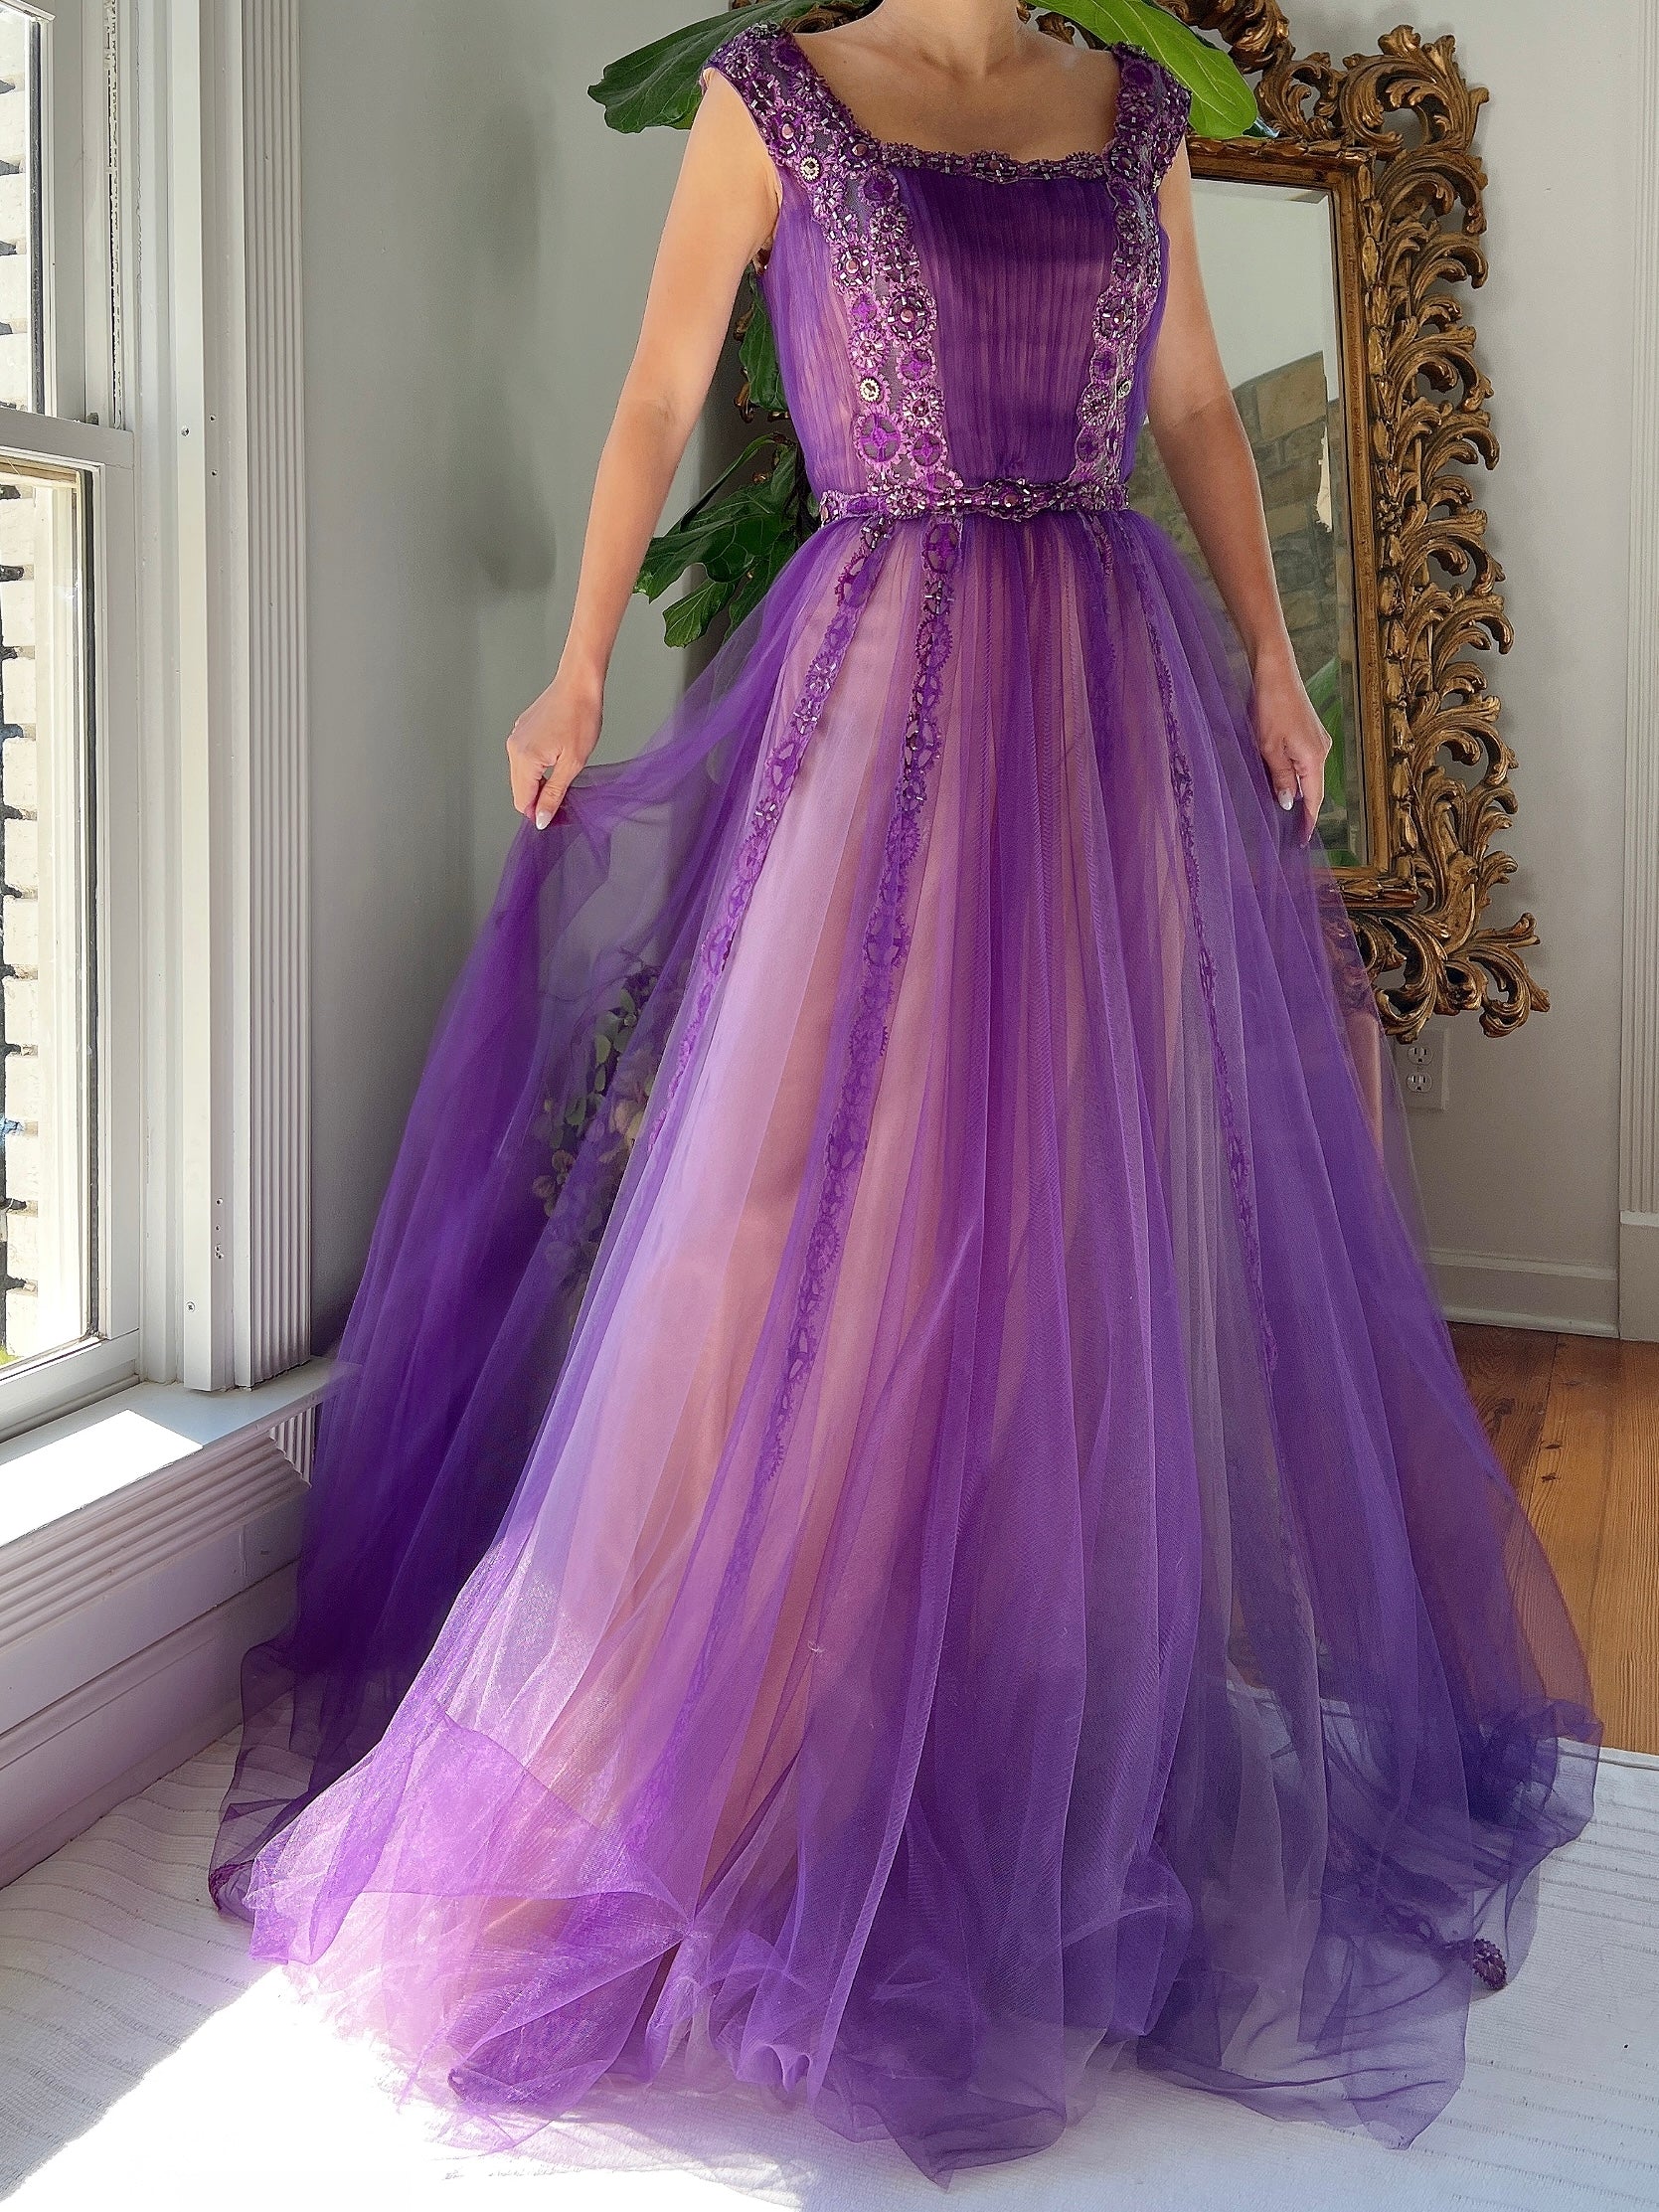 Tadashi Tulle Gown - S/M